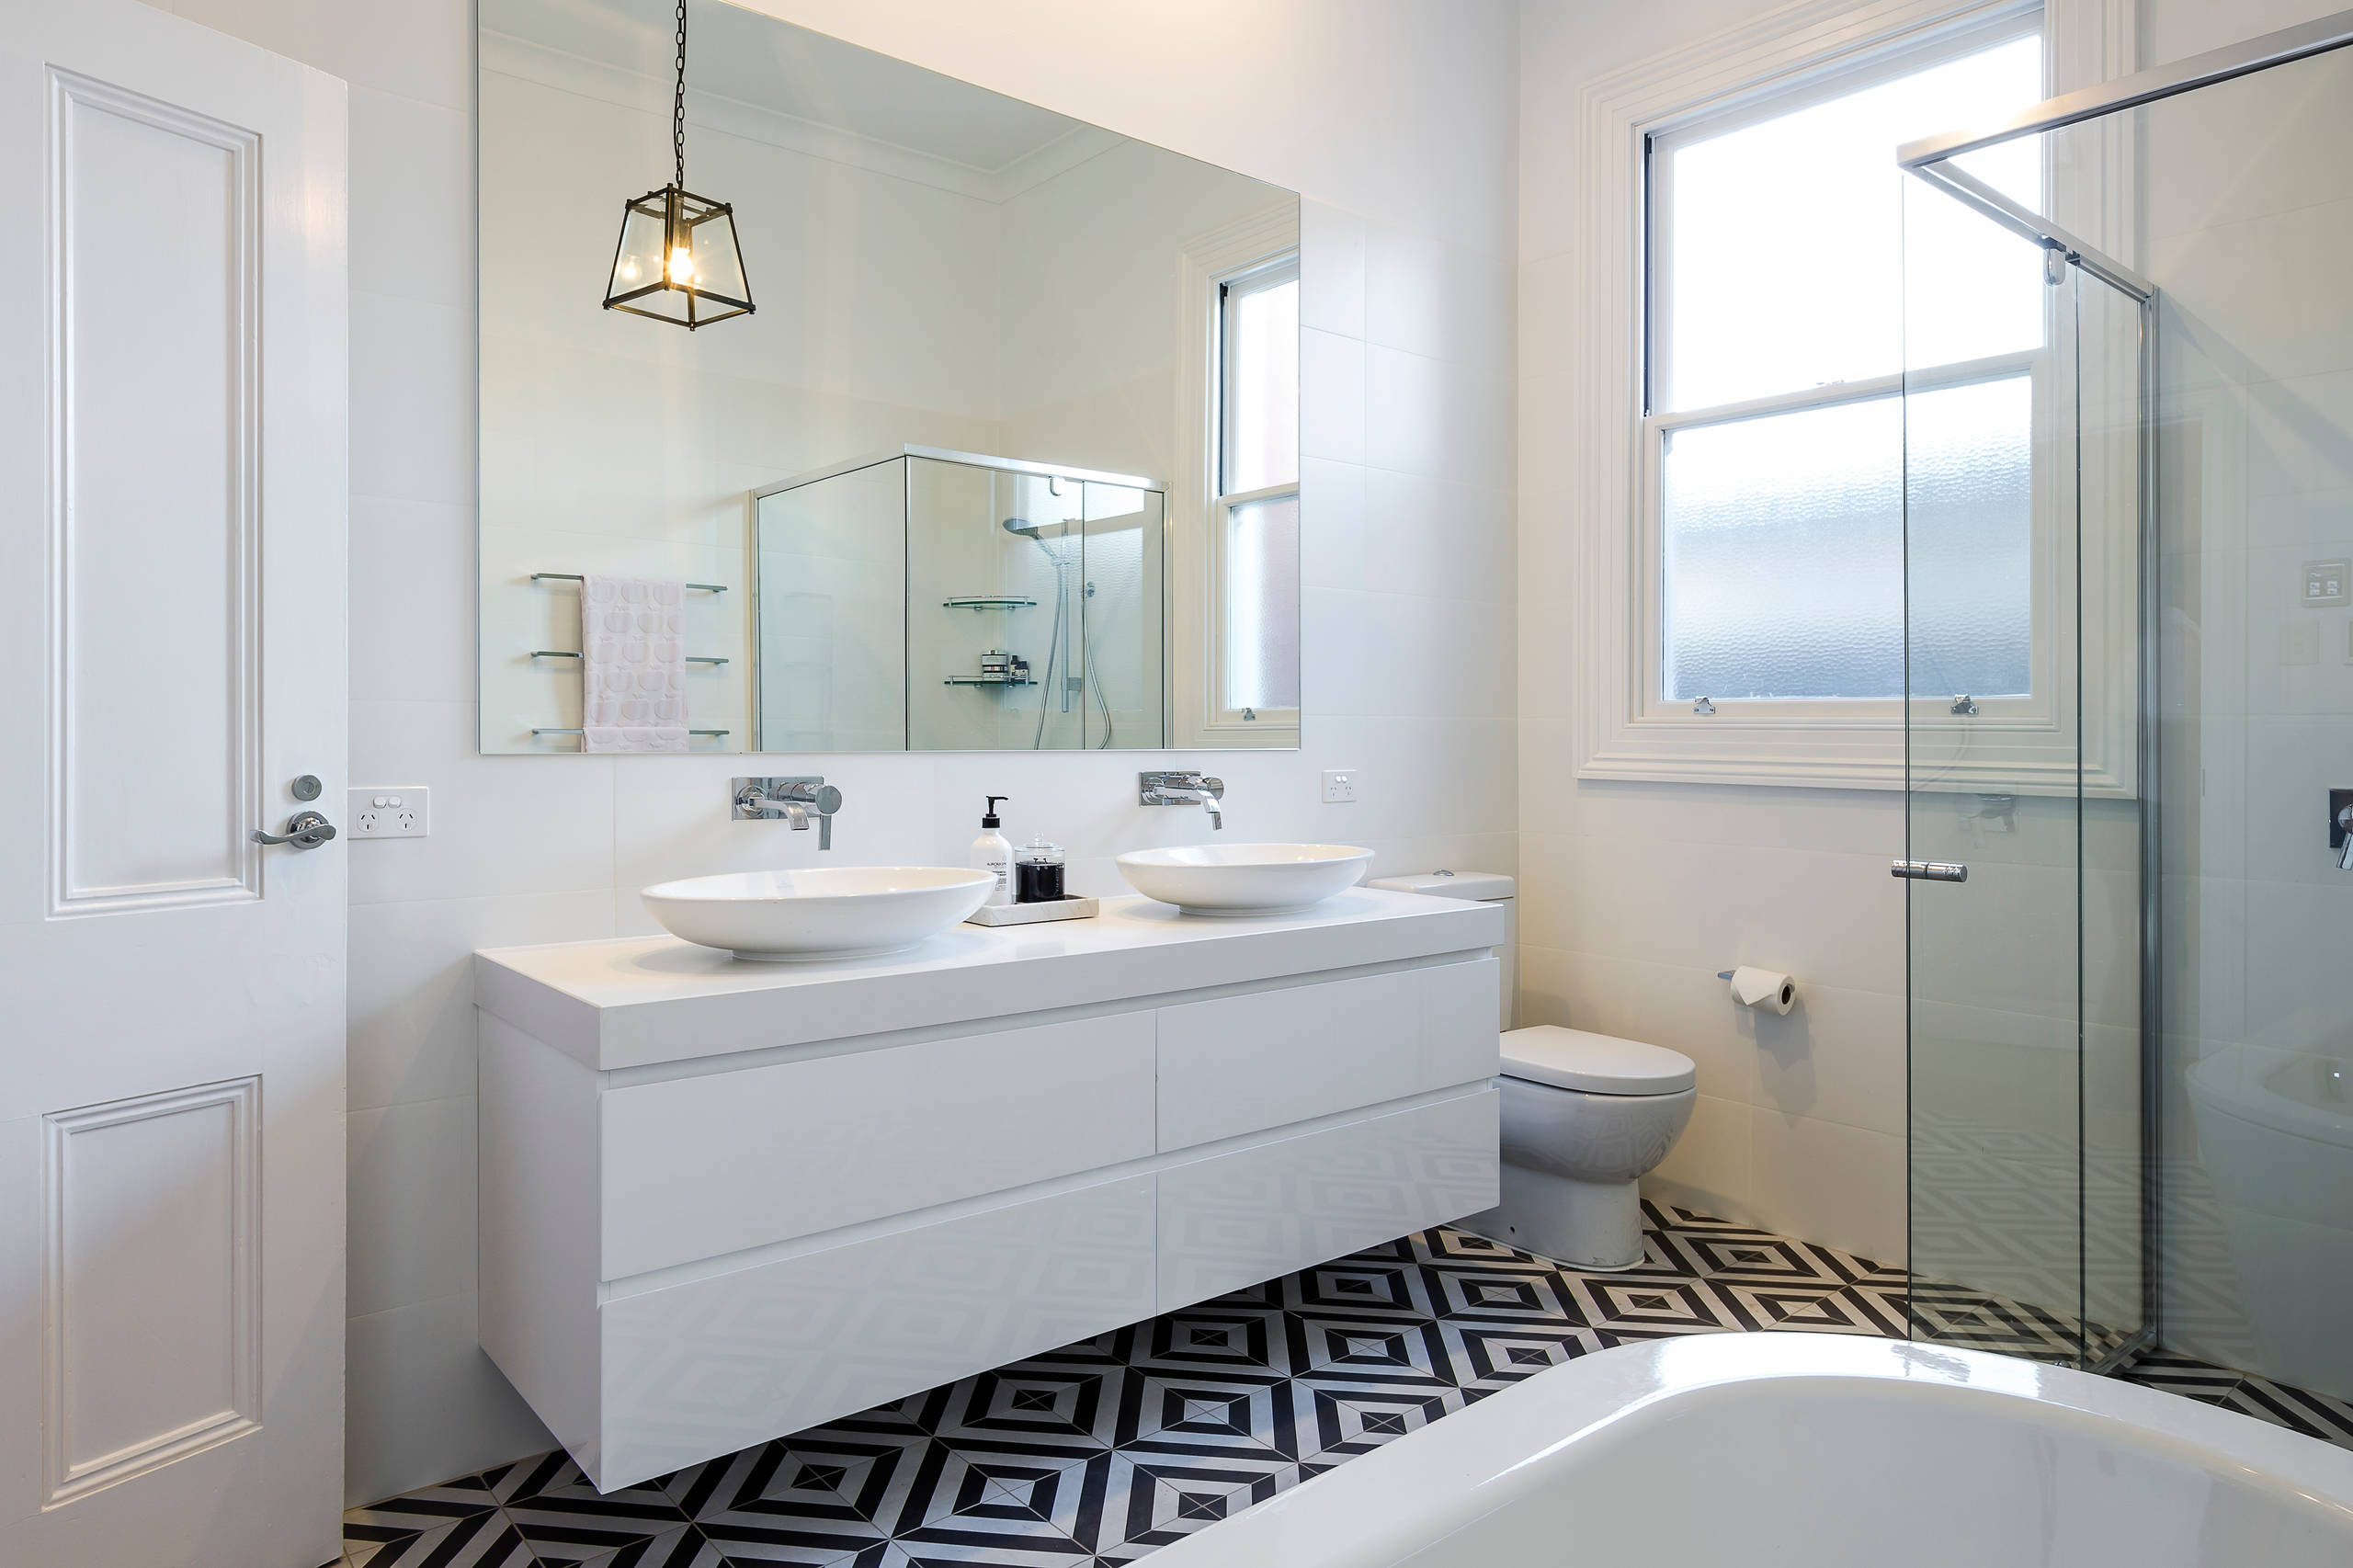 How To Choose A Bathroom Mirror Houzz Uk, What Size Mirror For 33 Inch Vanity